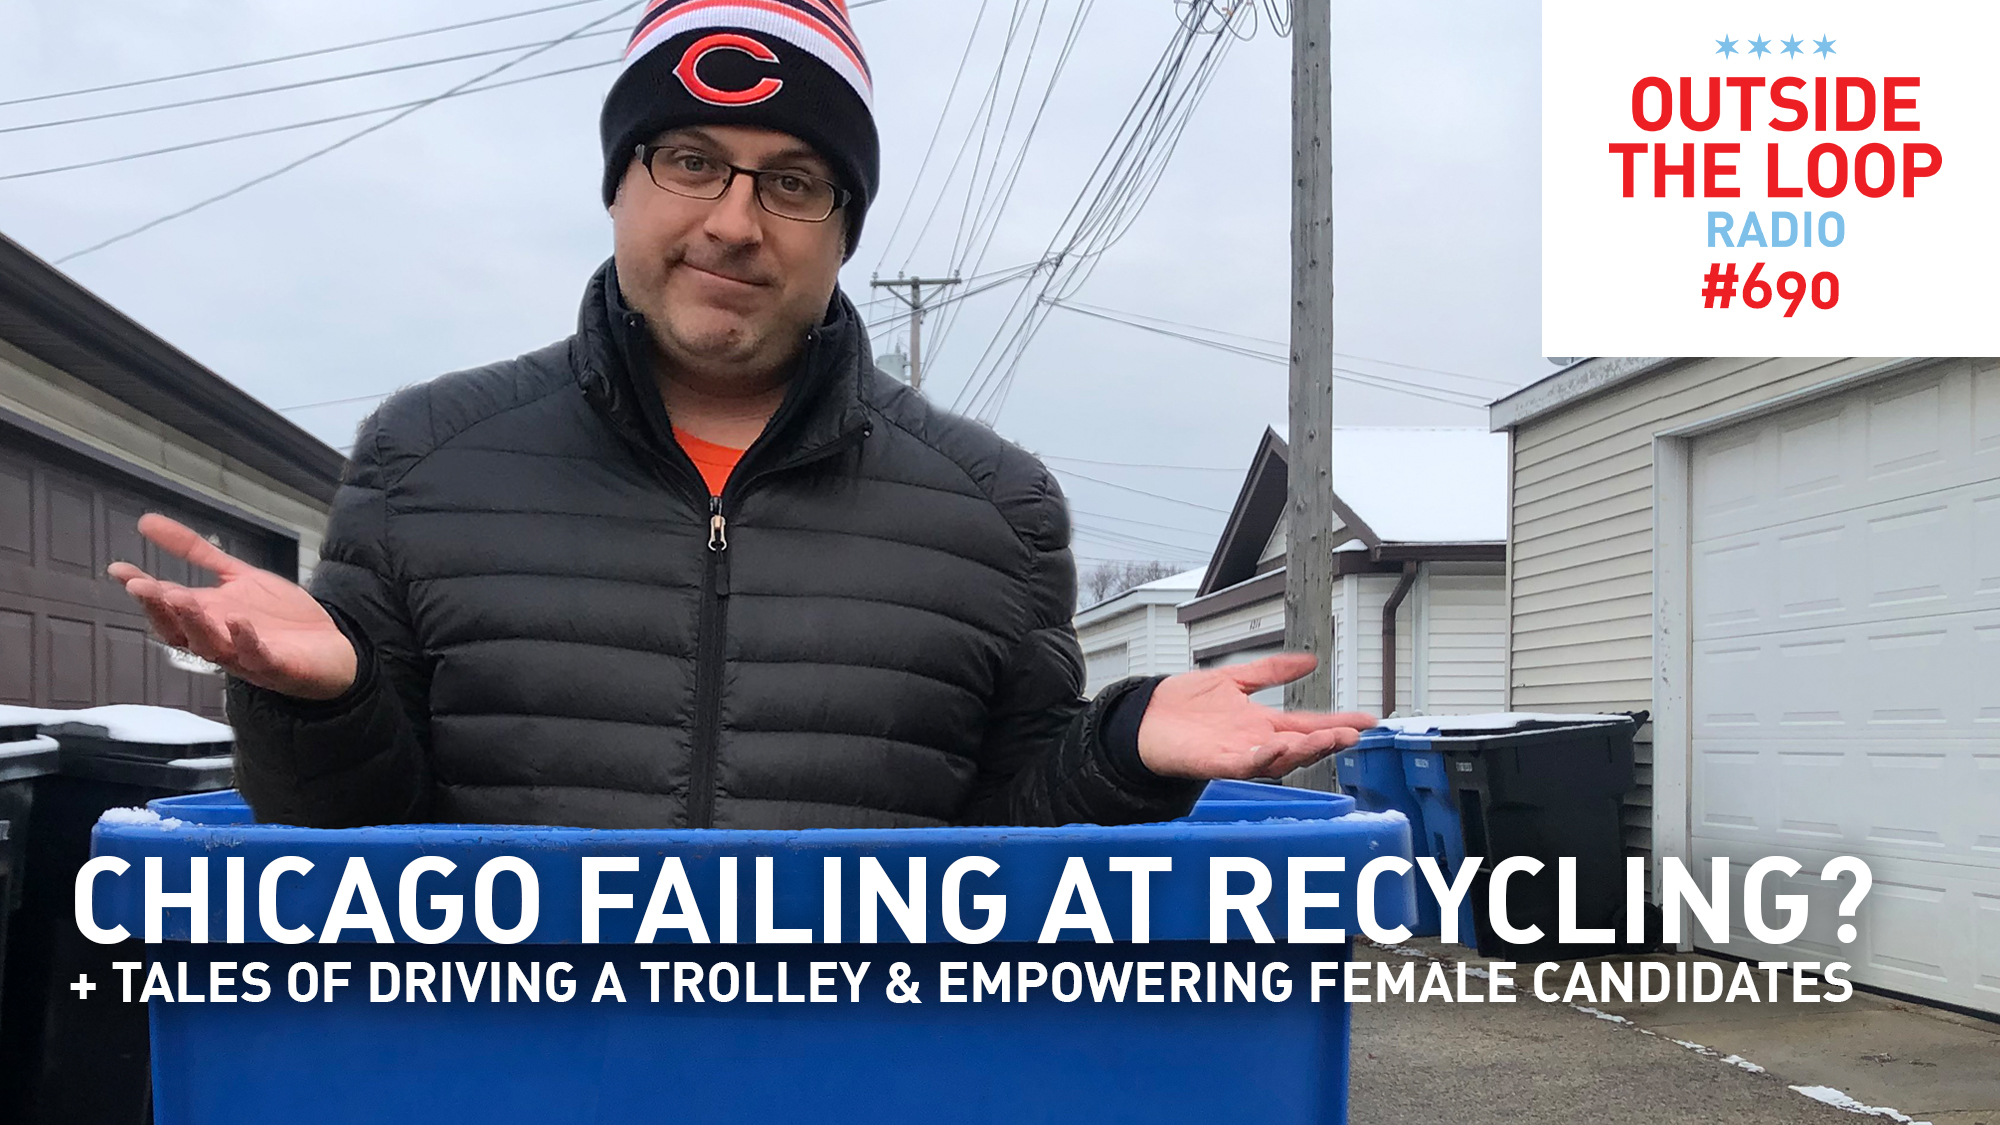 Mike Stephen ponders recycling in Chicago while standing in a blue recycling bin. That's dedication.